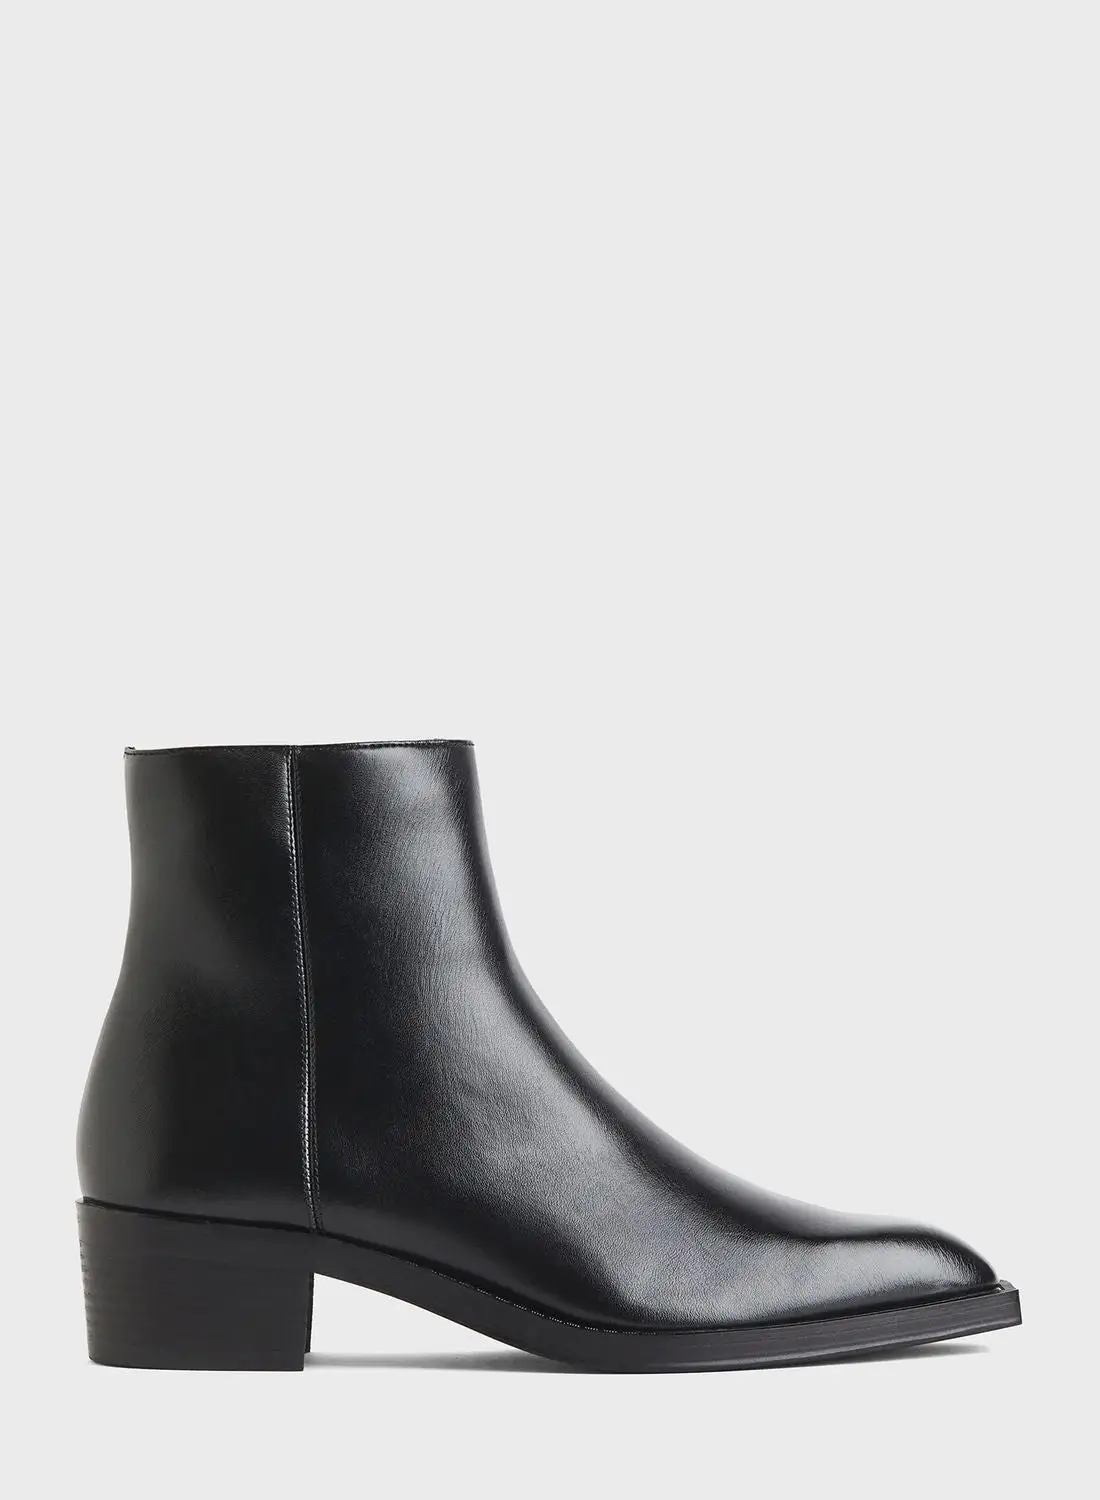 H&M Formal Ankle Boots